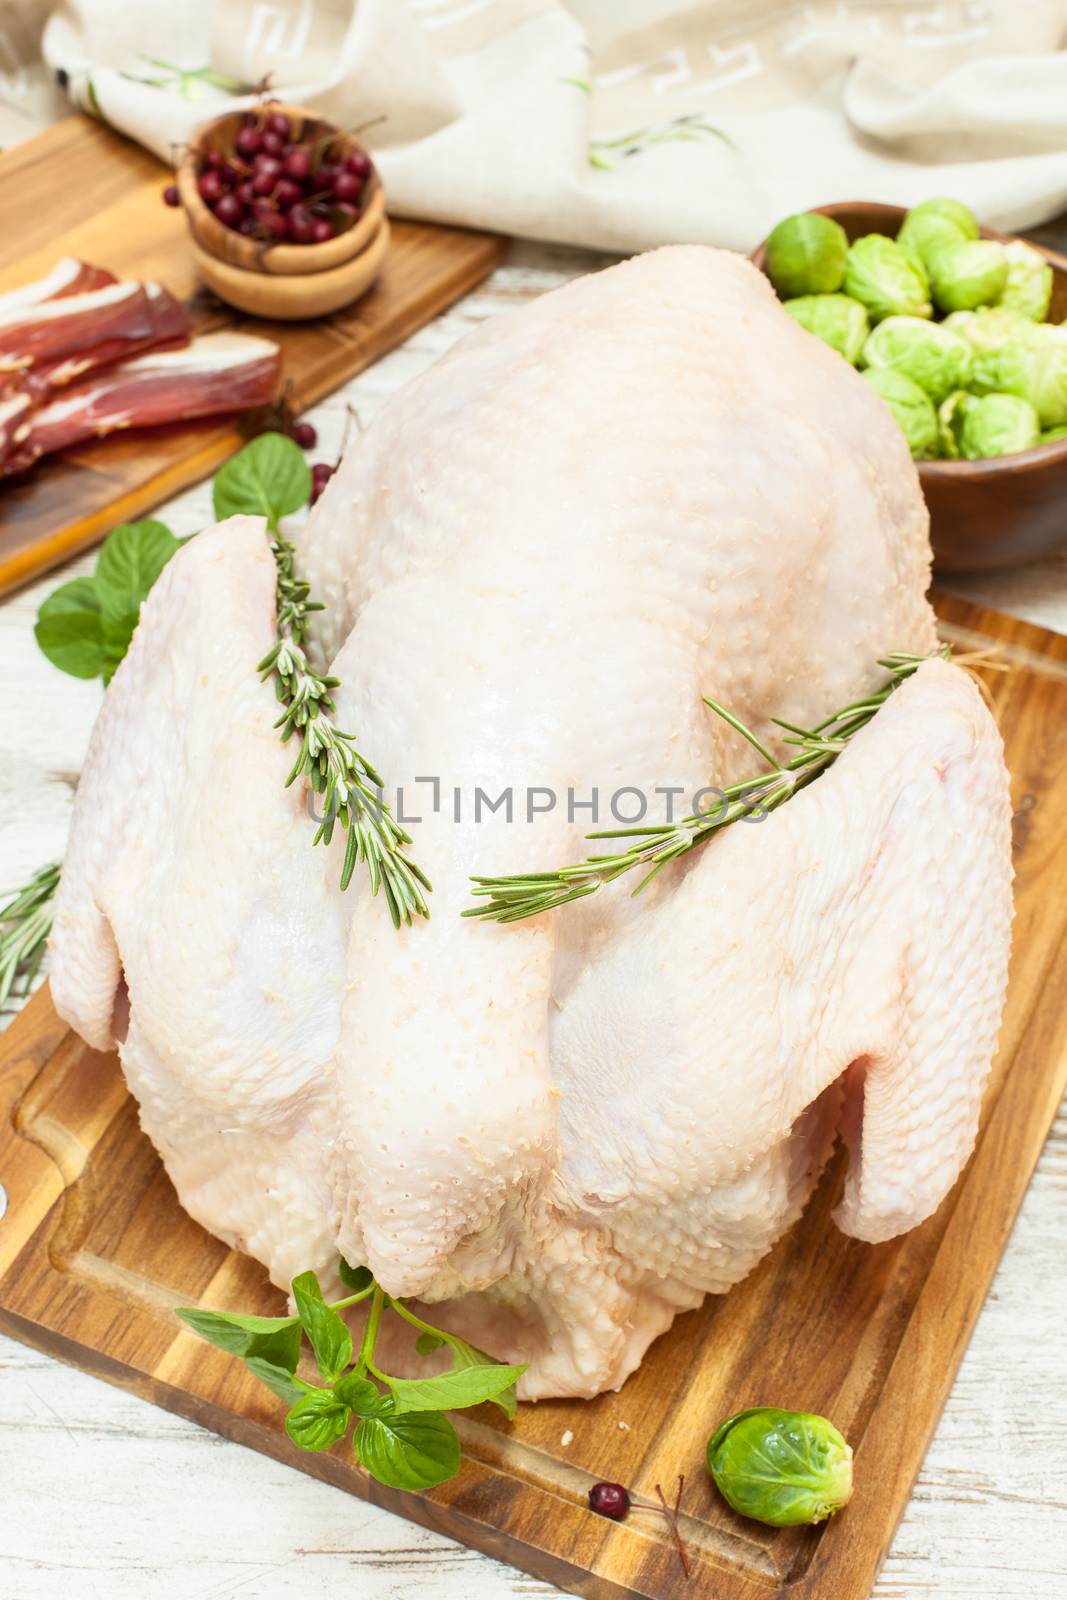 Whole raw turkey on wooden cutting board,vegetables, ham and spices. Viewed from above